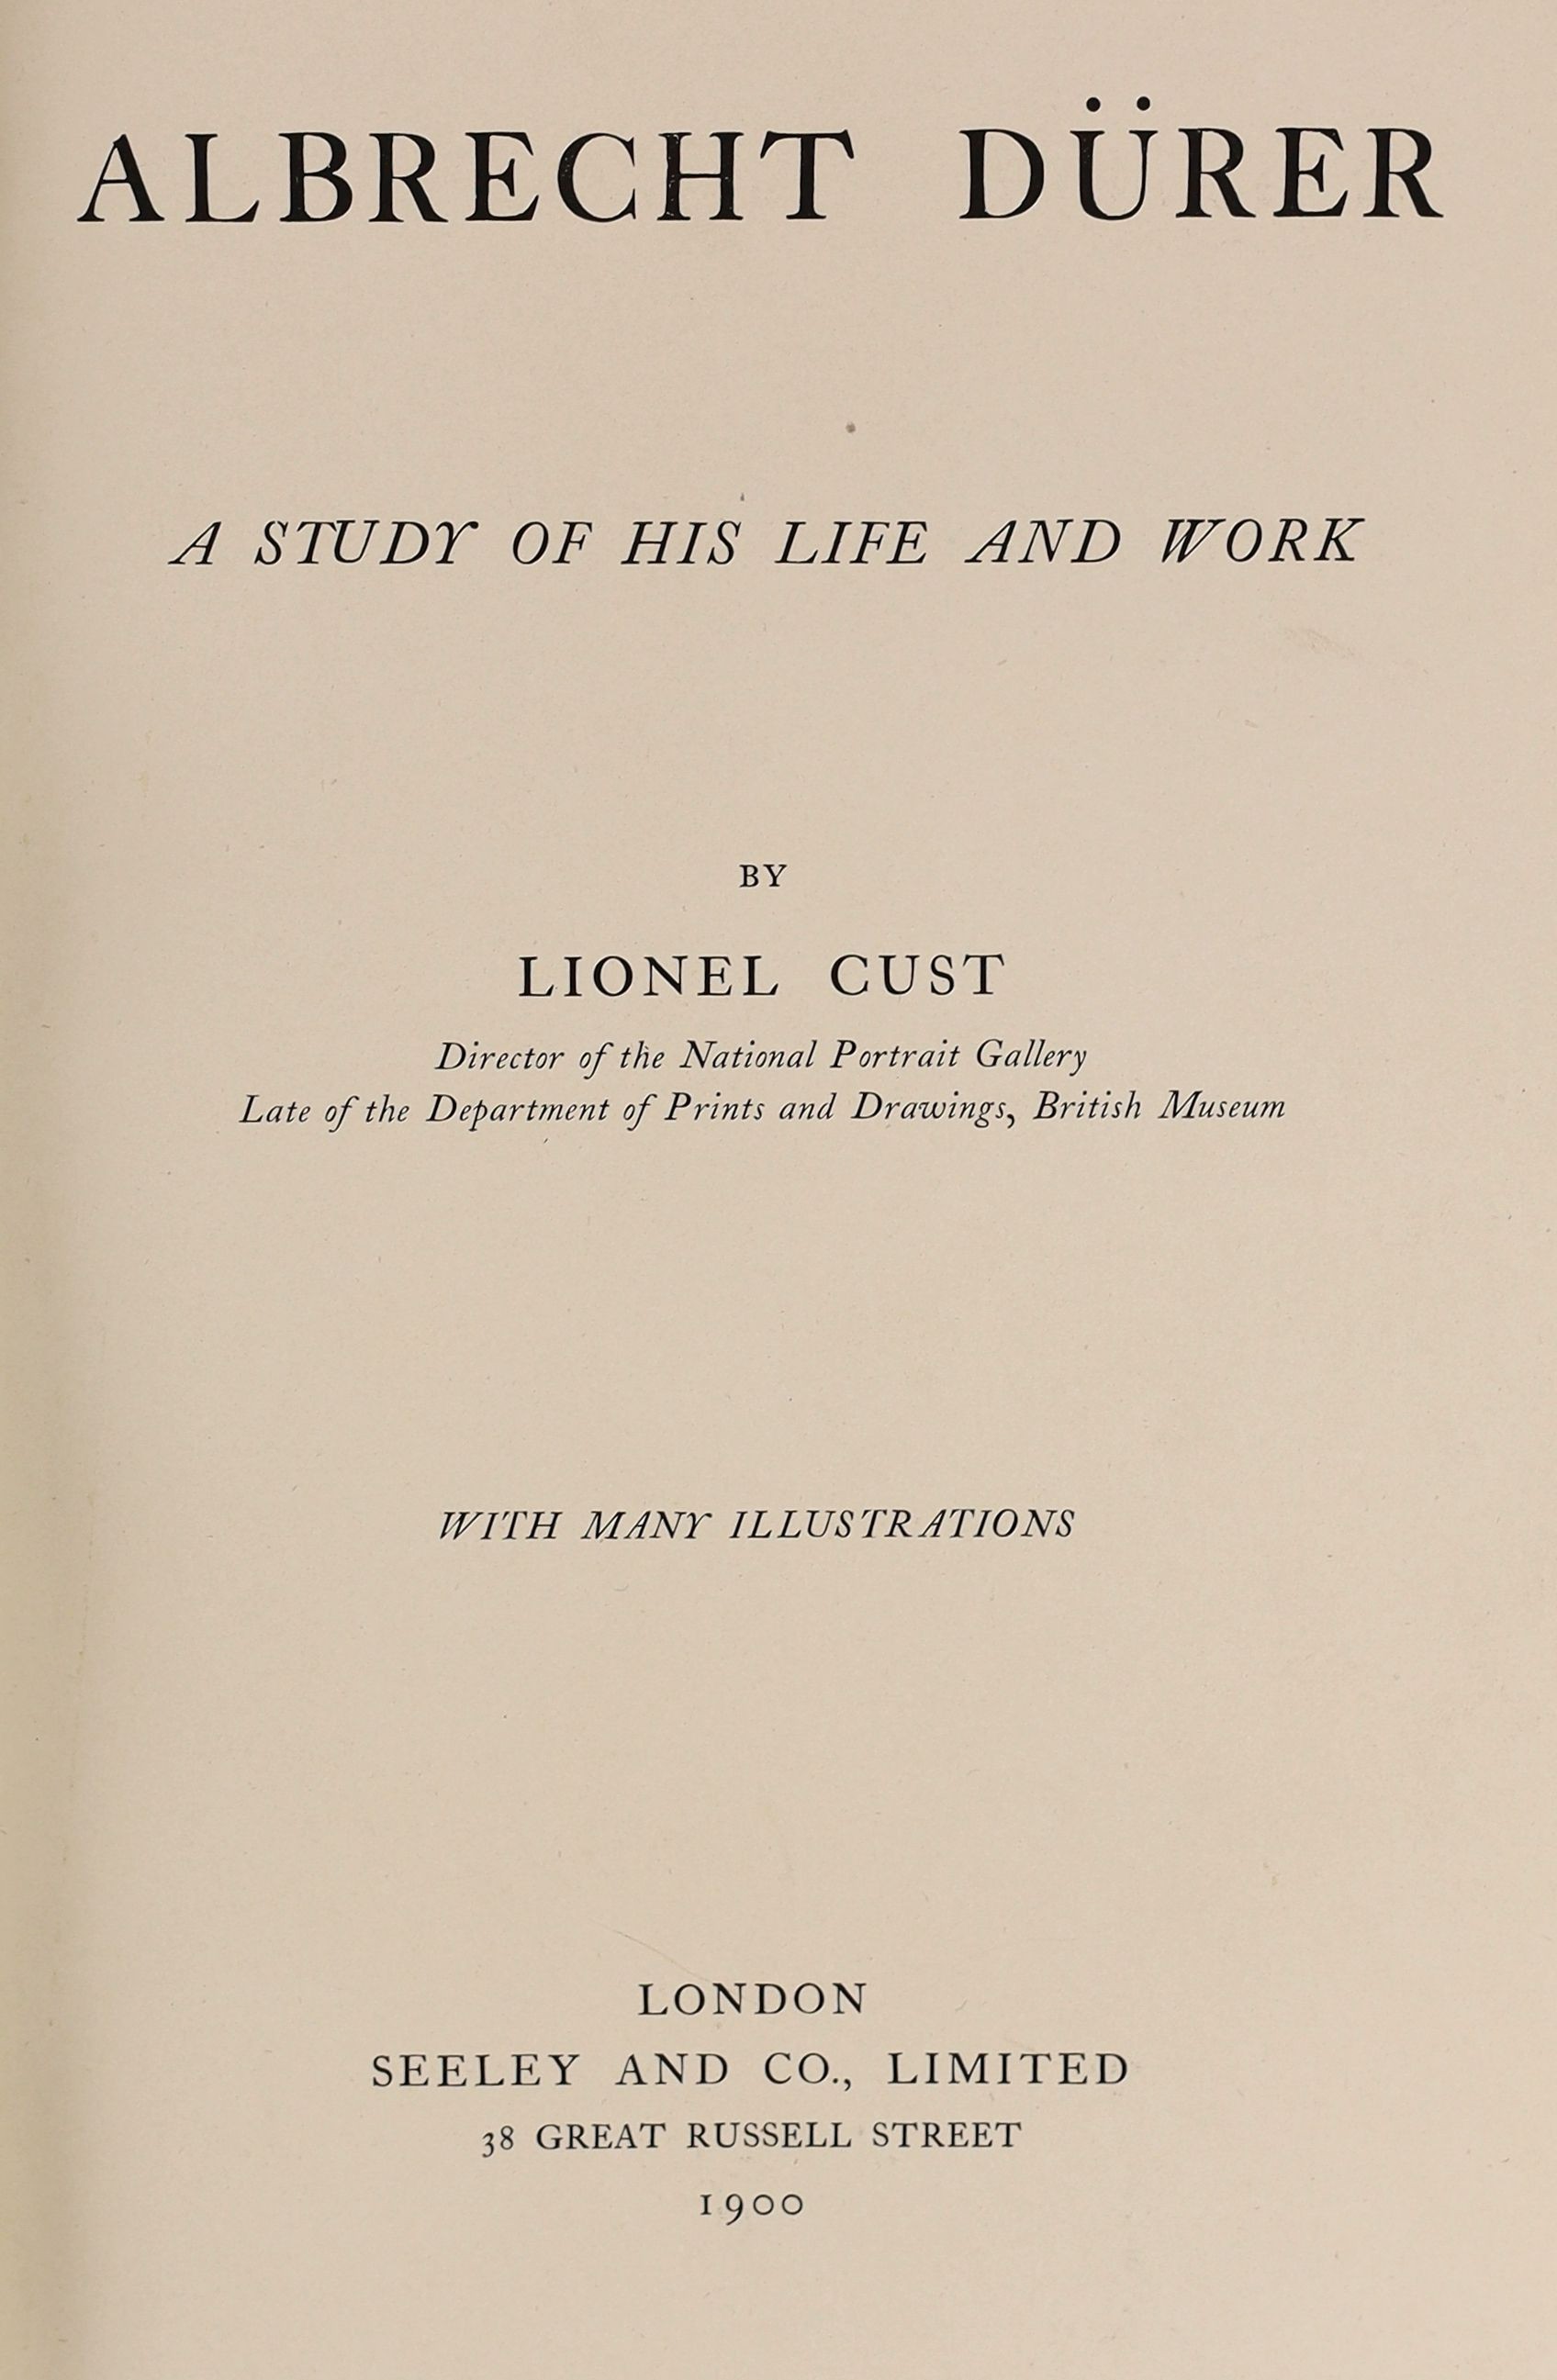 Cust, Lionel - Albrecht Durer, a Study of His Life and Work, 8vo, red morocco gilt by A.J. Vaughan, dated 1912, Seely and Co., Limited, London, 1900